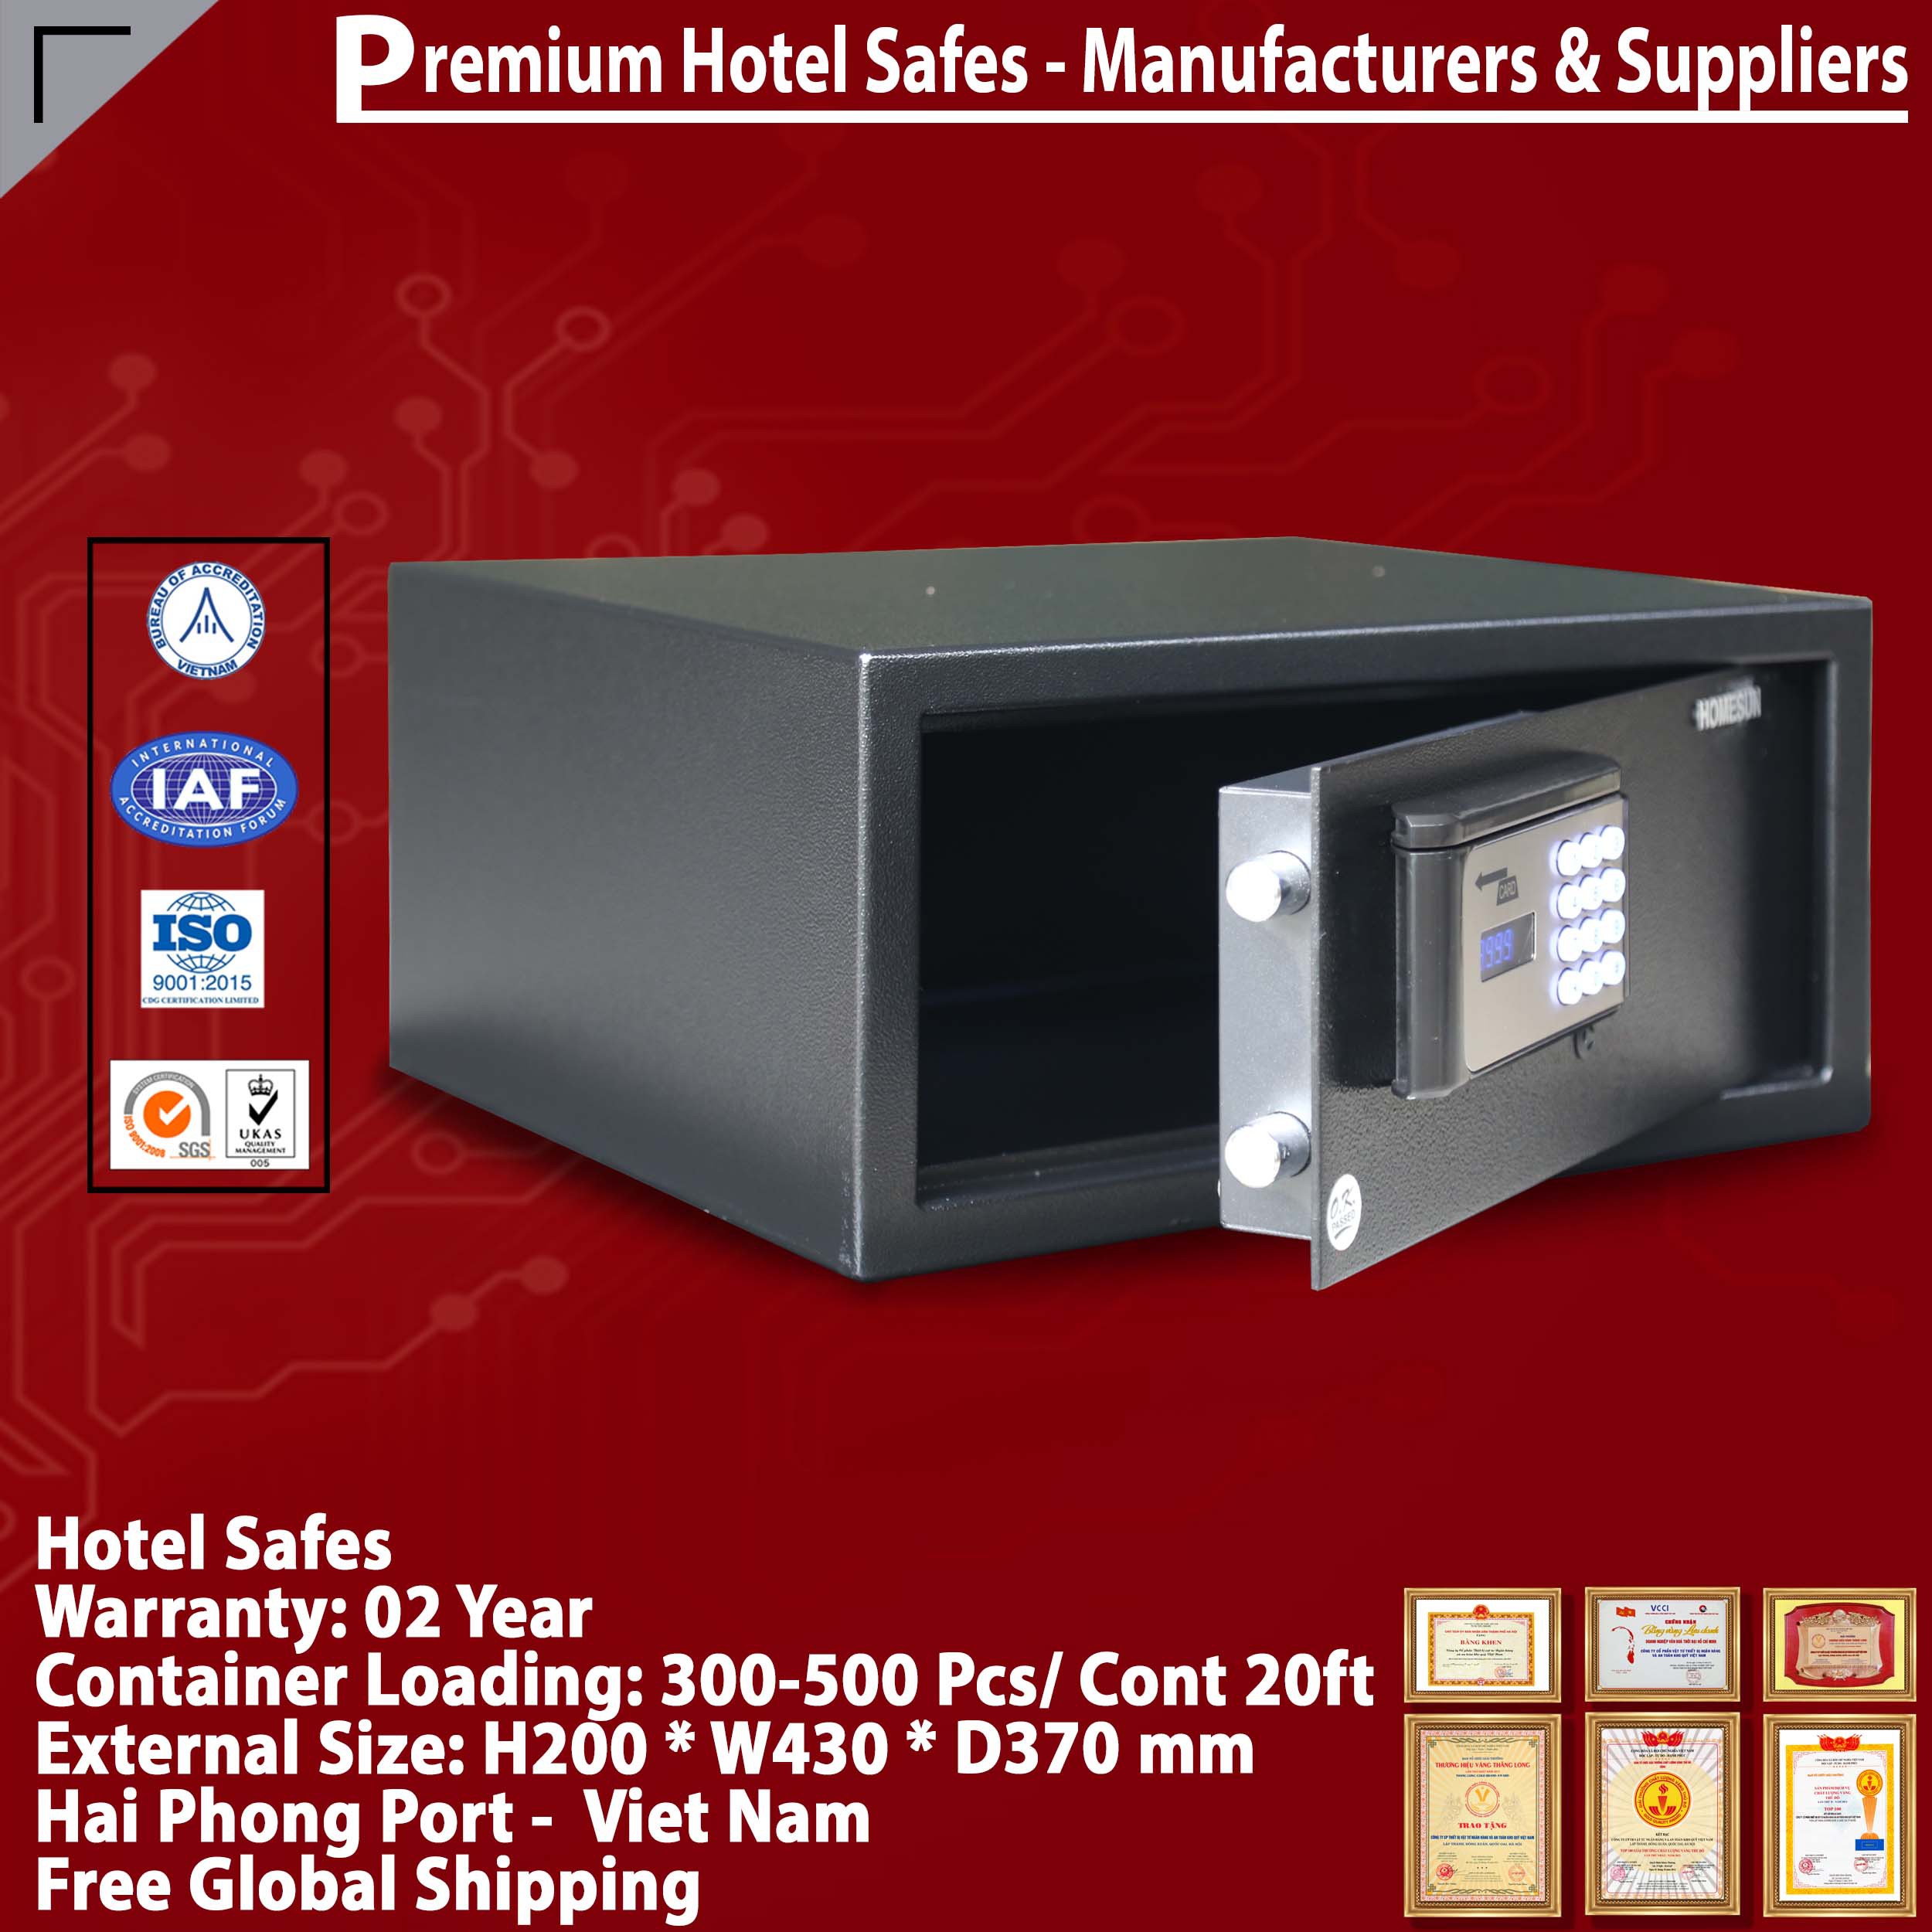 Safes in Hotel High Quality Price Ratio‎